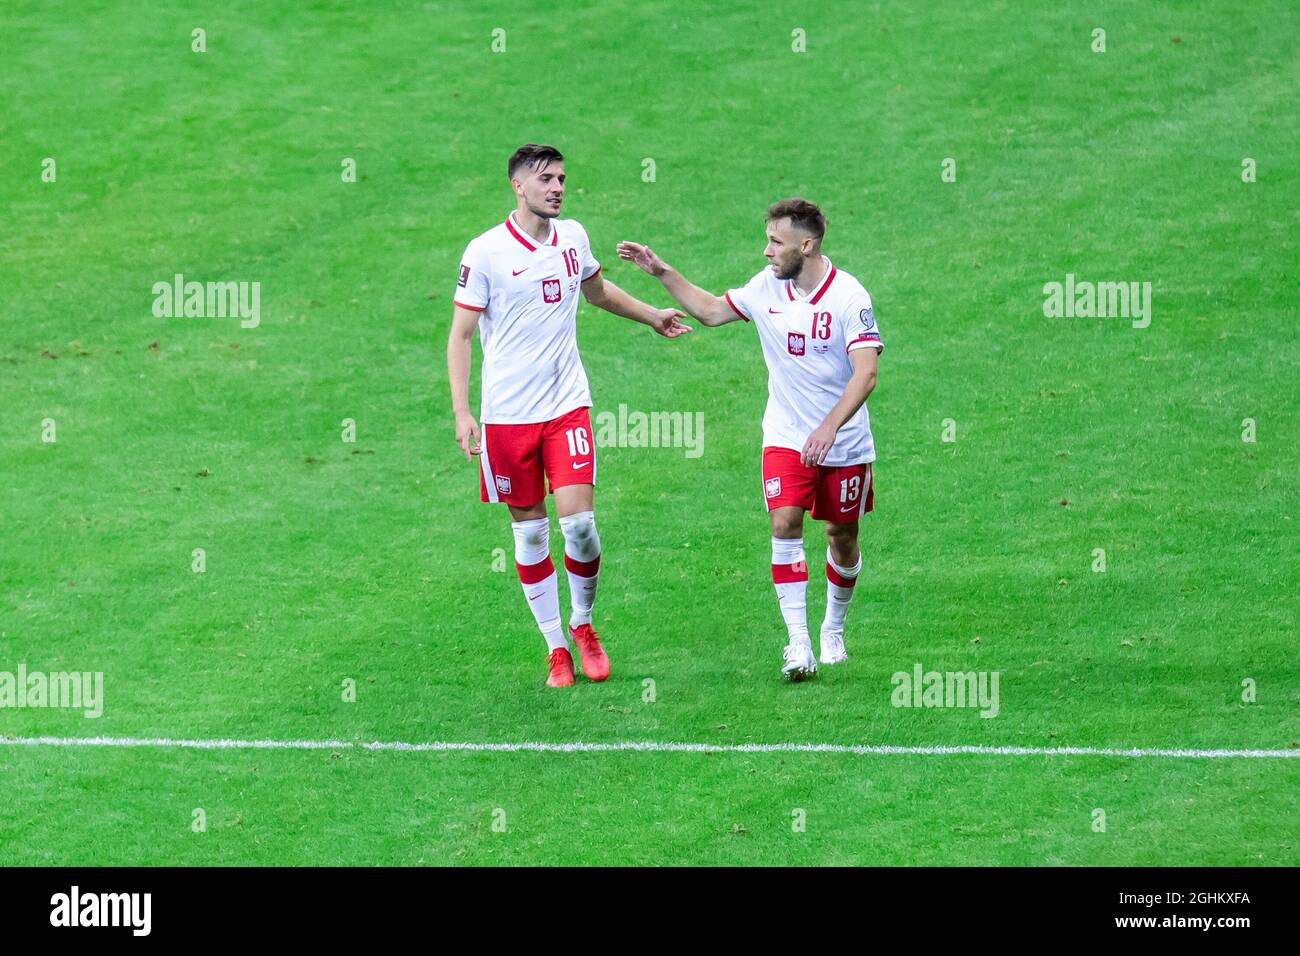 Jakub Moder (L) and Maciej Rybus (R) of Poland in action during the FIFA World Cup 2022 Qatar qualifying match between Poland and Albania at PGE Narodowy Stadium. (Final score; Poland 4:1 Albania) Stock Photo